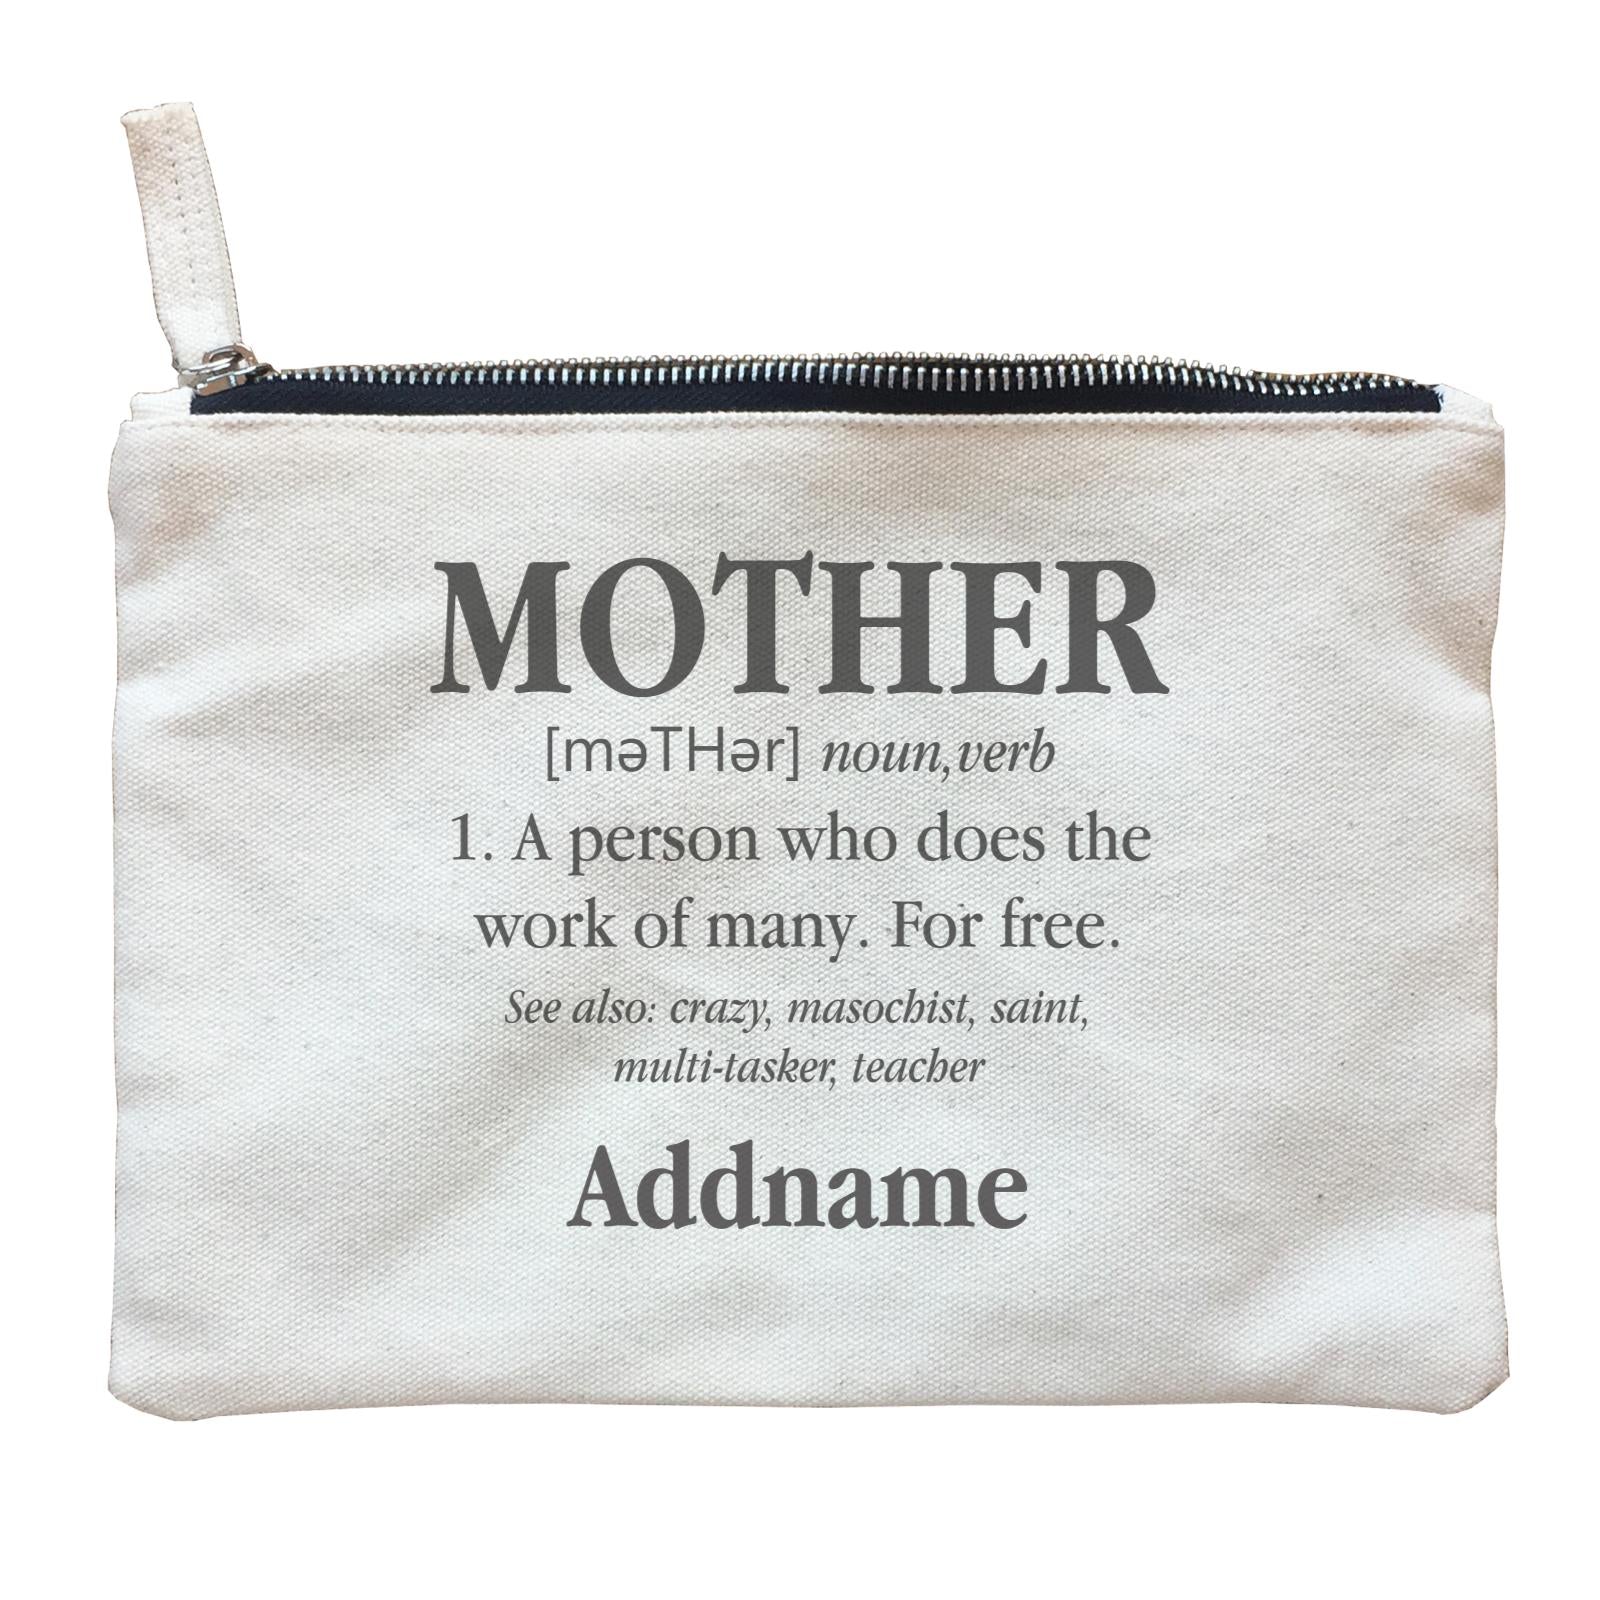 Funny Mom Quotes Mother Meaning A Person Who Does The Work Of Many For Free Addname Zipper Pouch